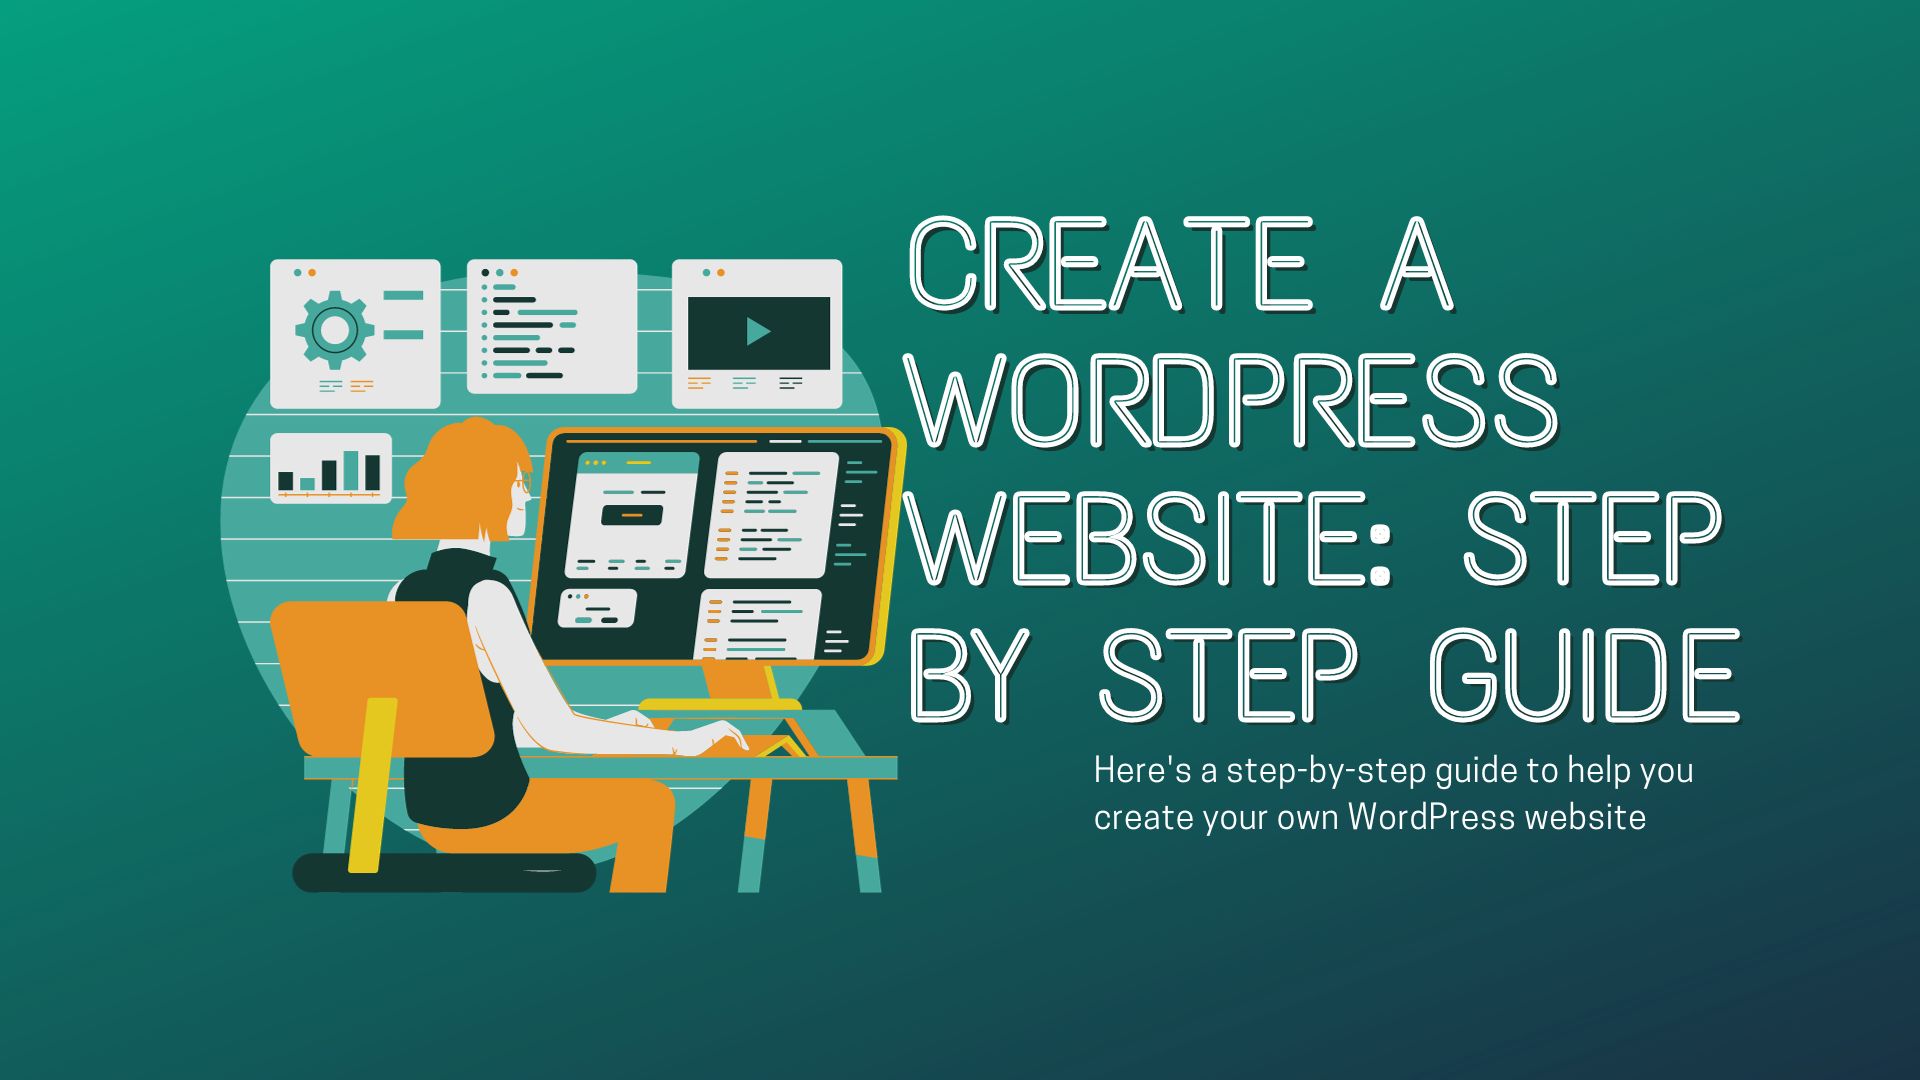 How to Create a WordPress Website: Step by Step Guide